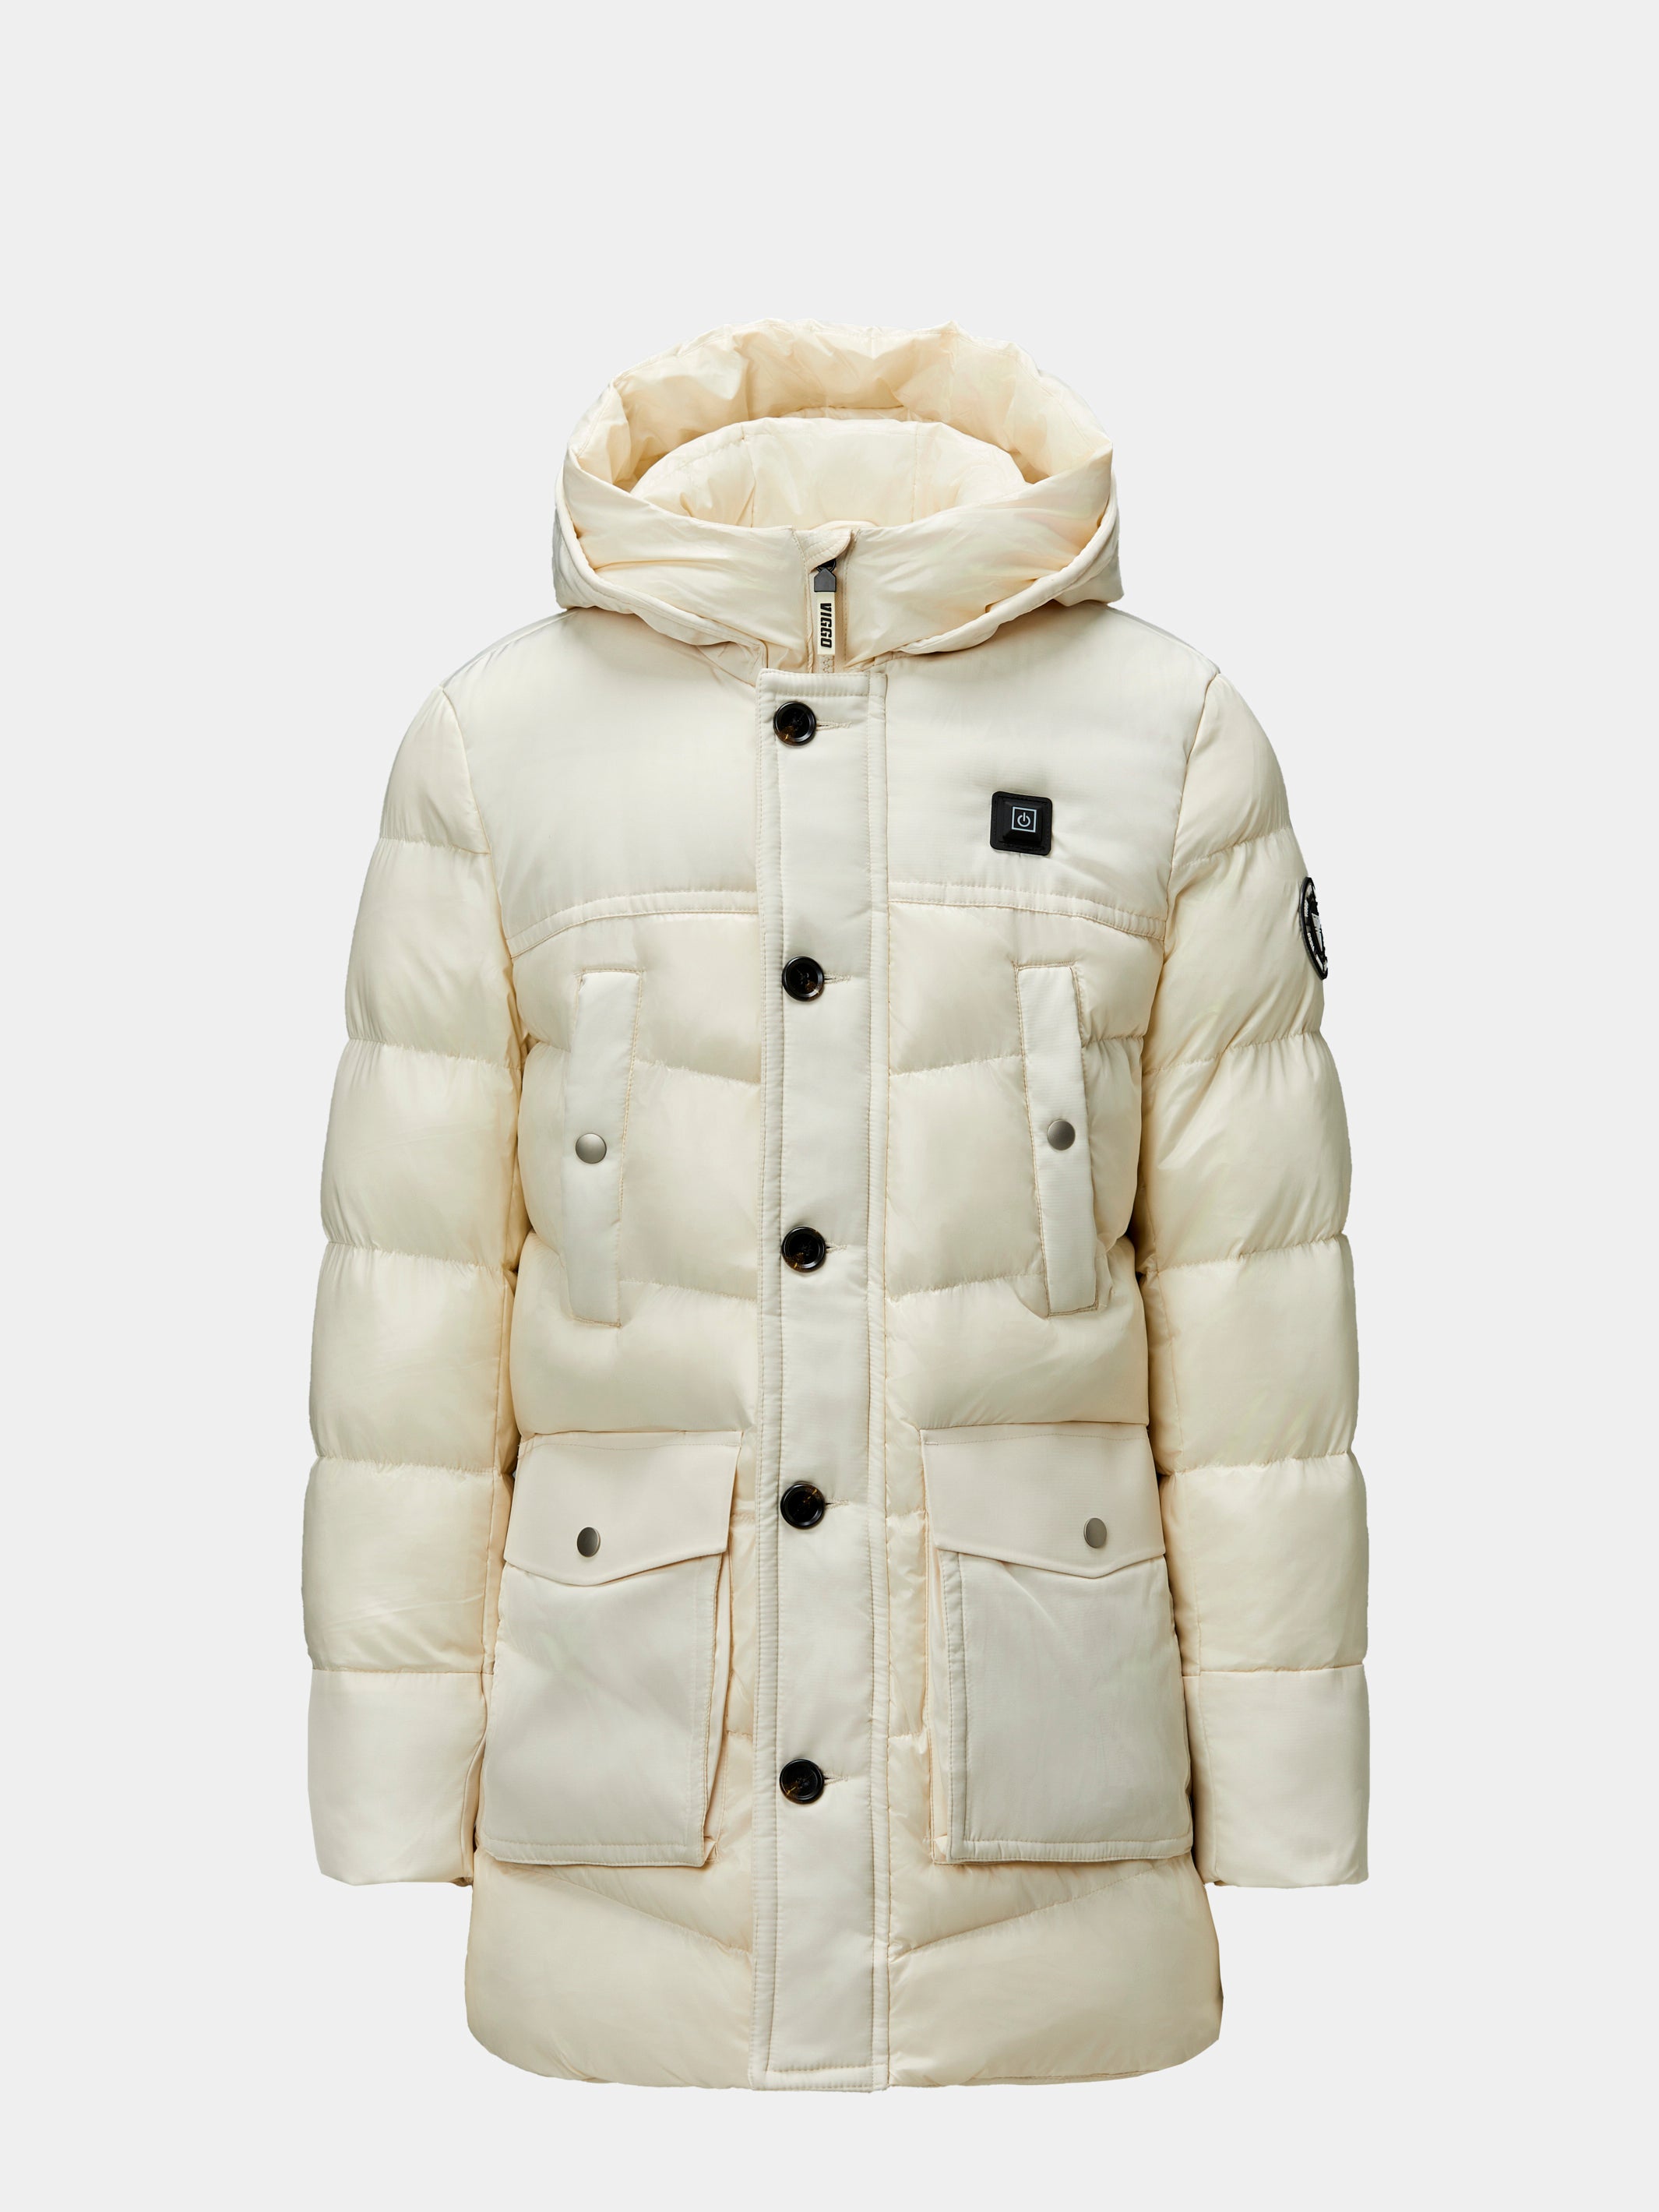 Long white jacket, with heating